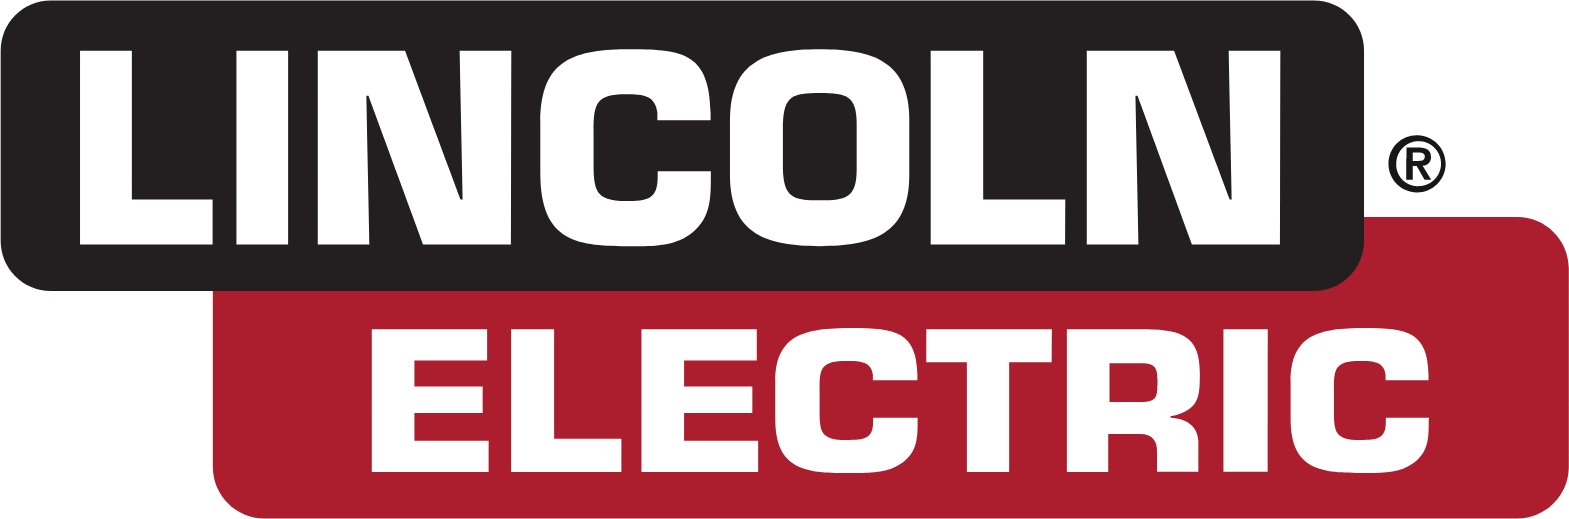 Lincoln Electric
 logo (PNG transparent)